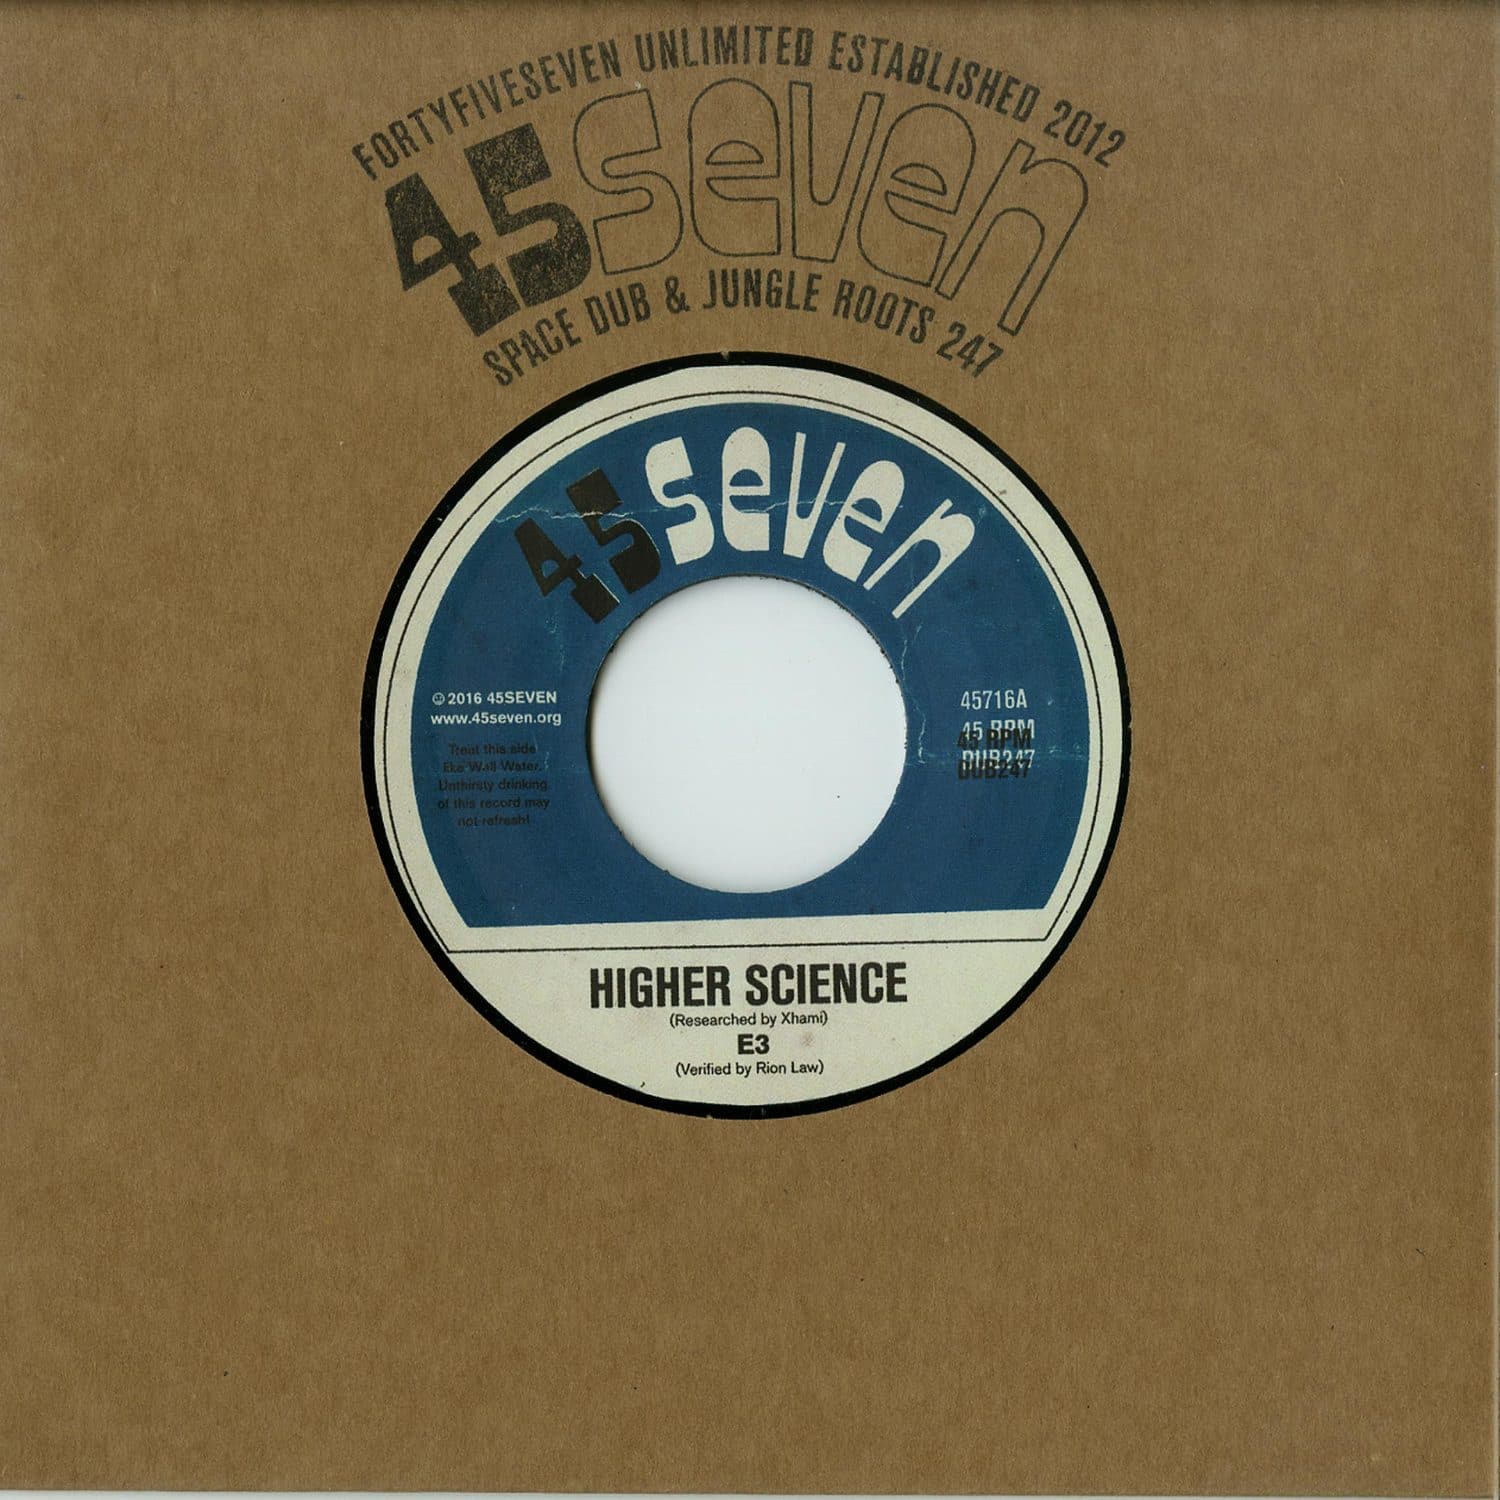 E3 - HIGHER SCIENCE 